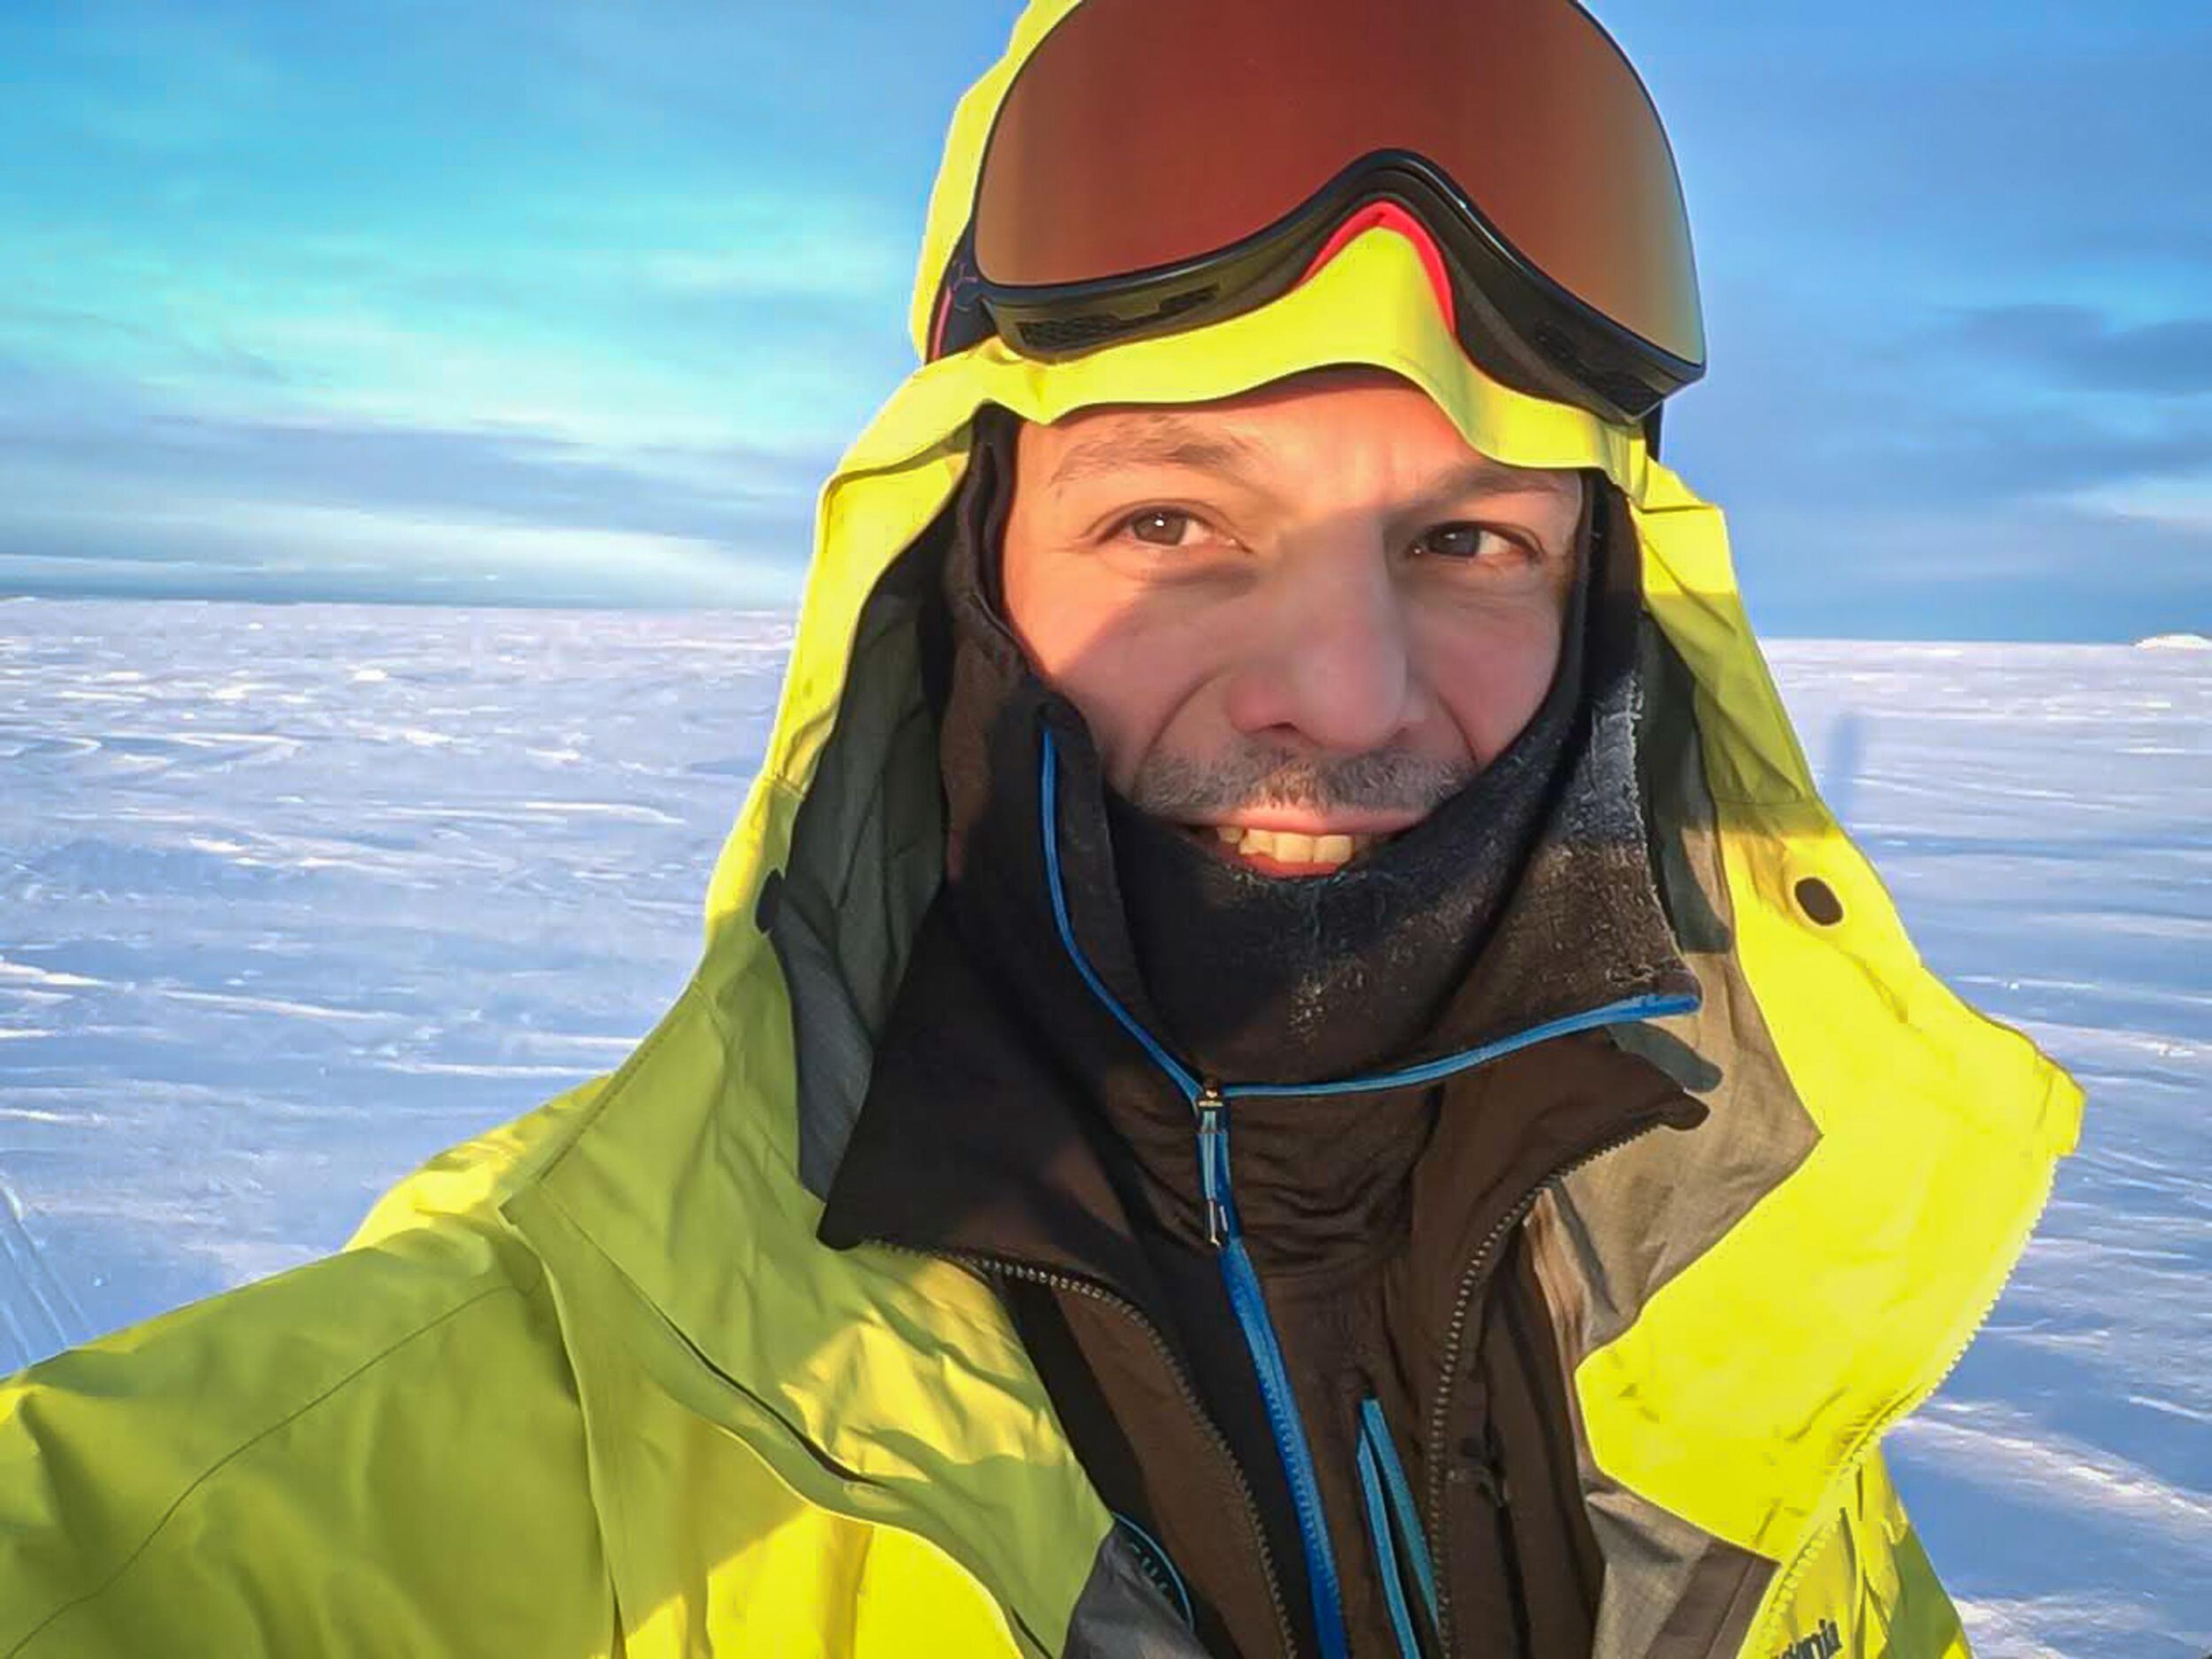 A selfie of a person in cold-weather gear with a hood and goggles, with a vast expanse of snow and ice stretching out behind them under a bright sky.